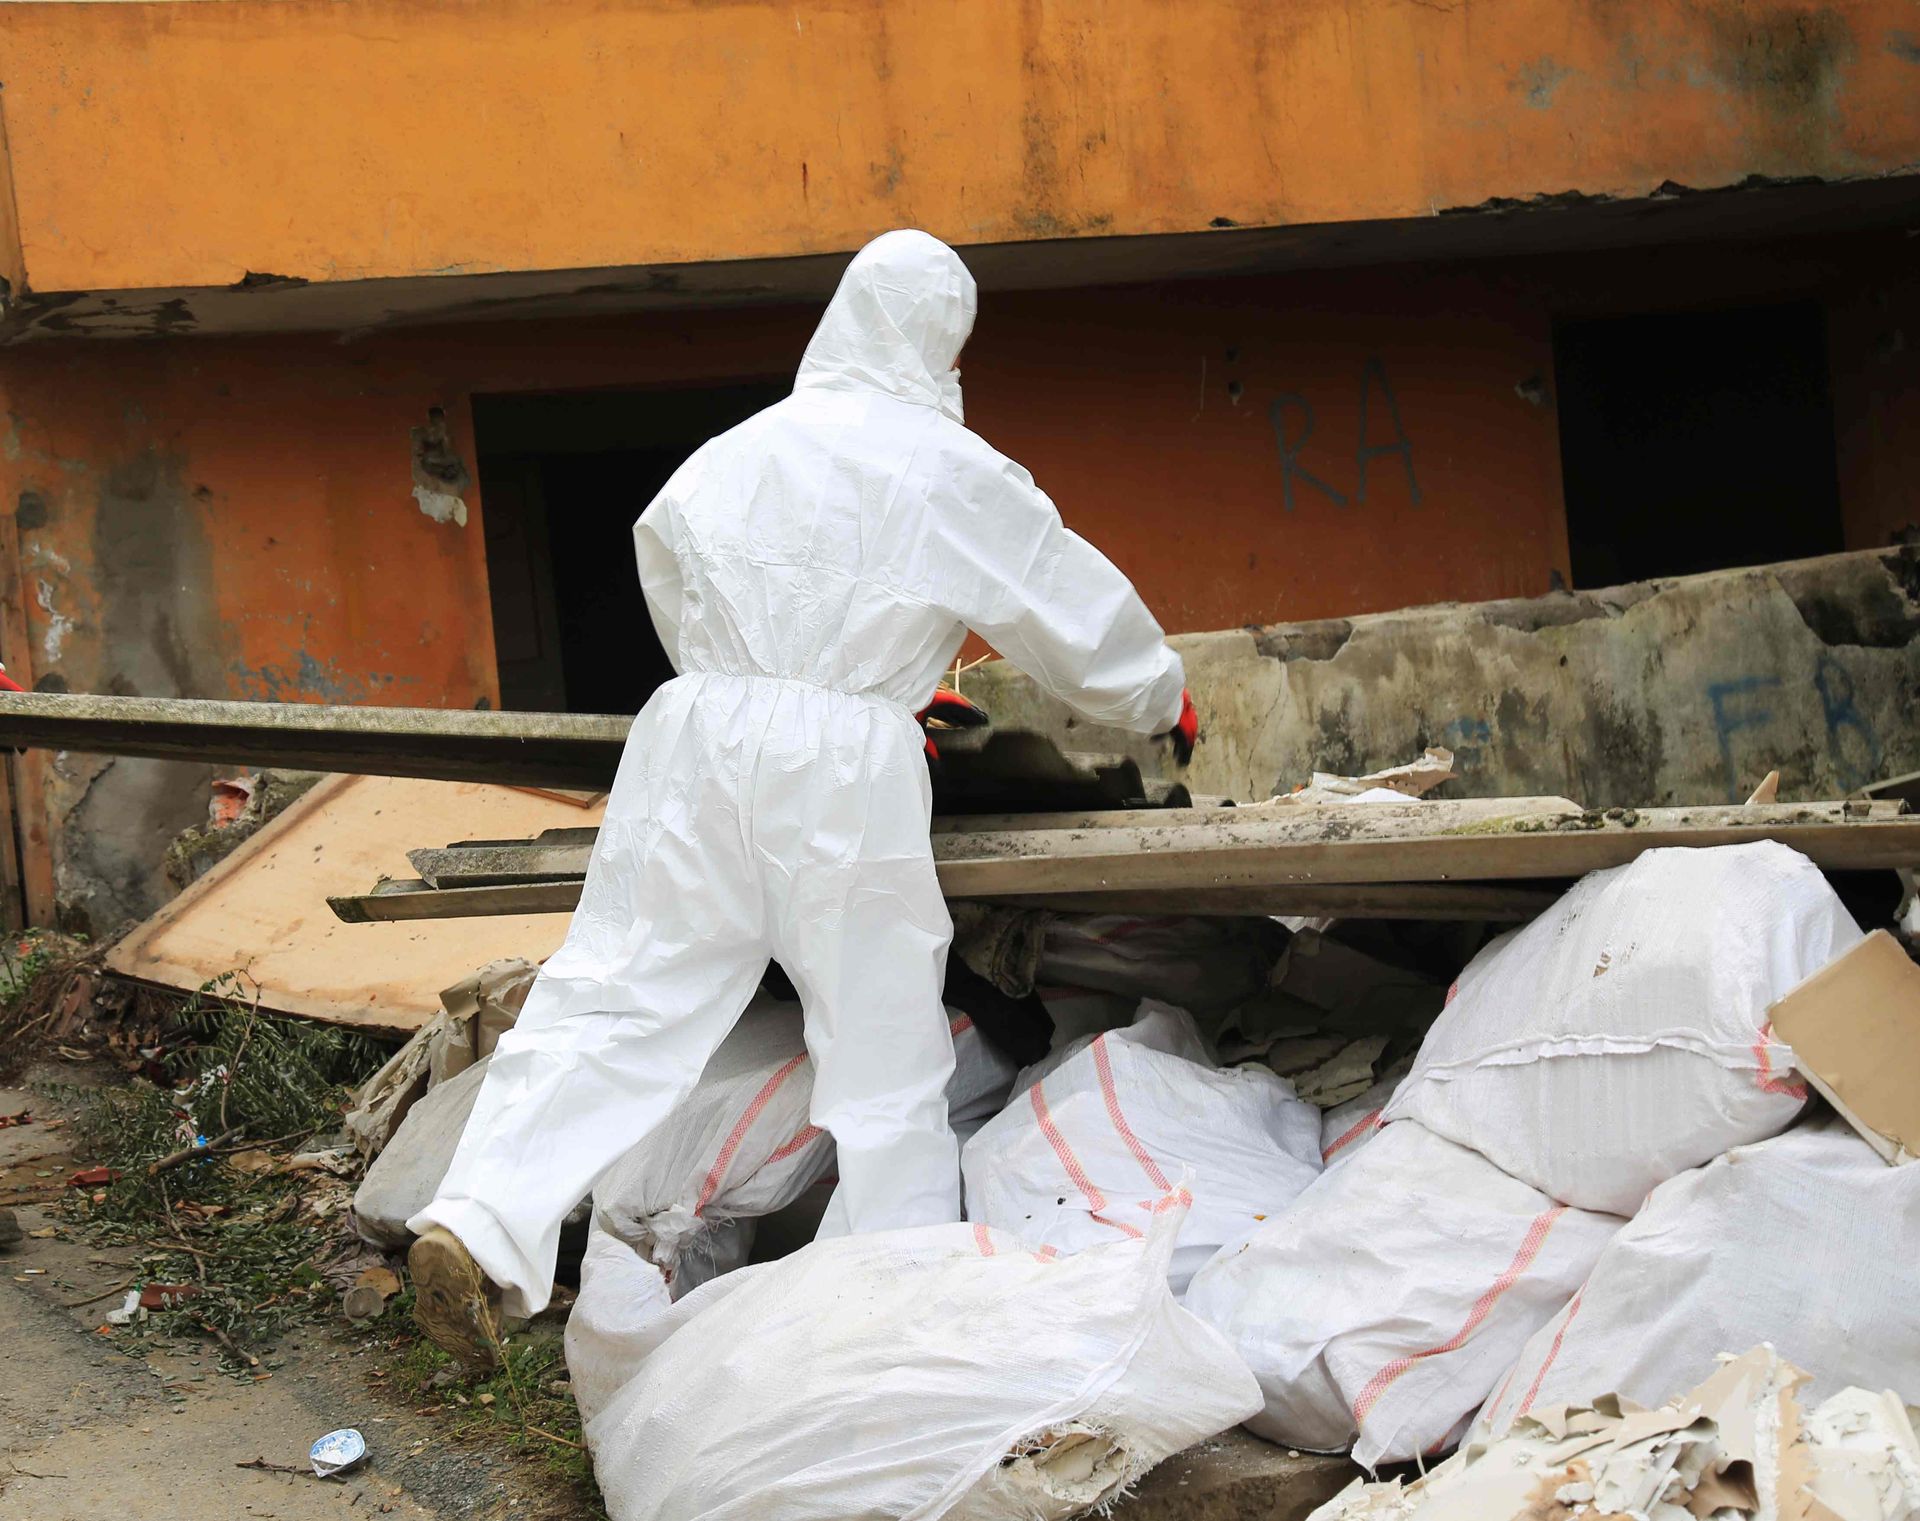 A man in a protective suit is working on a pile of trash